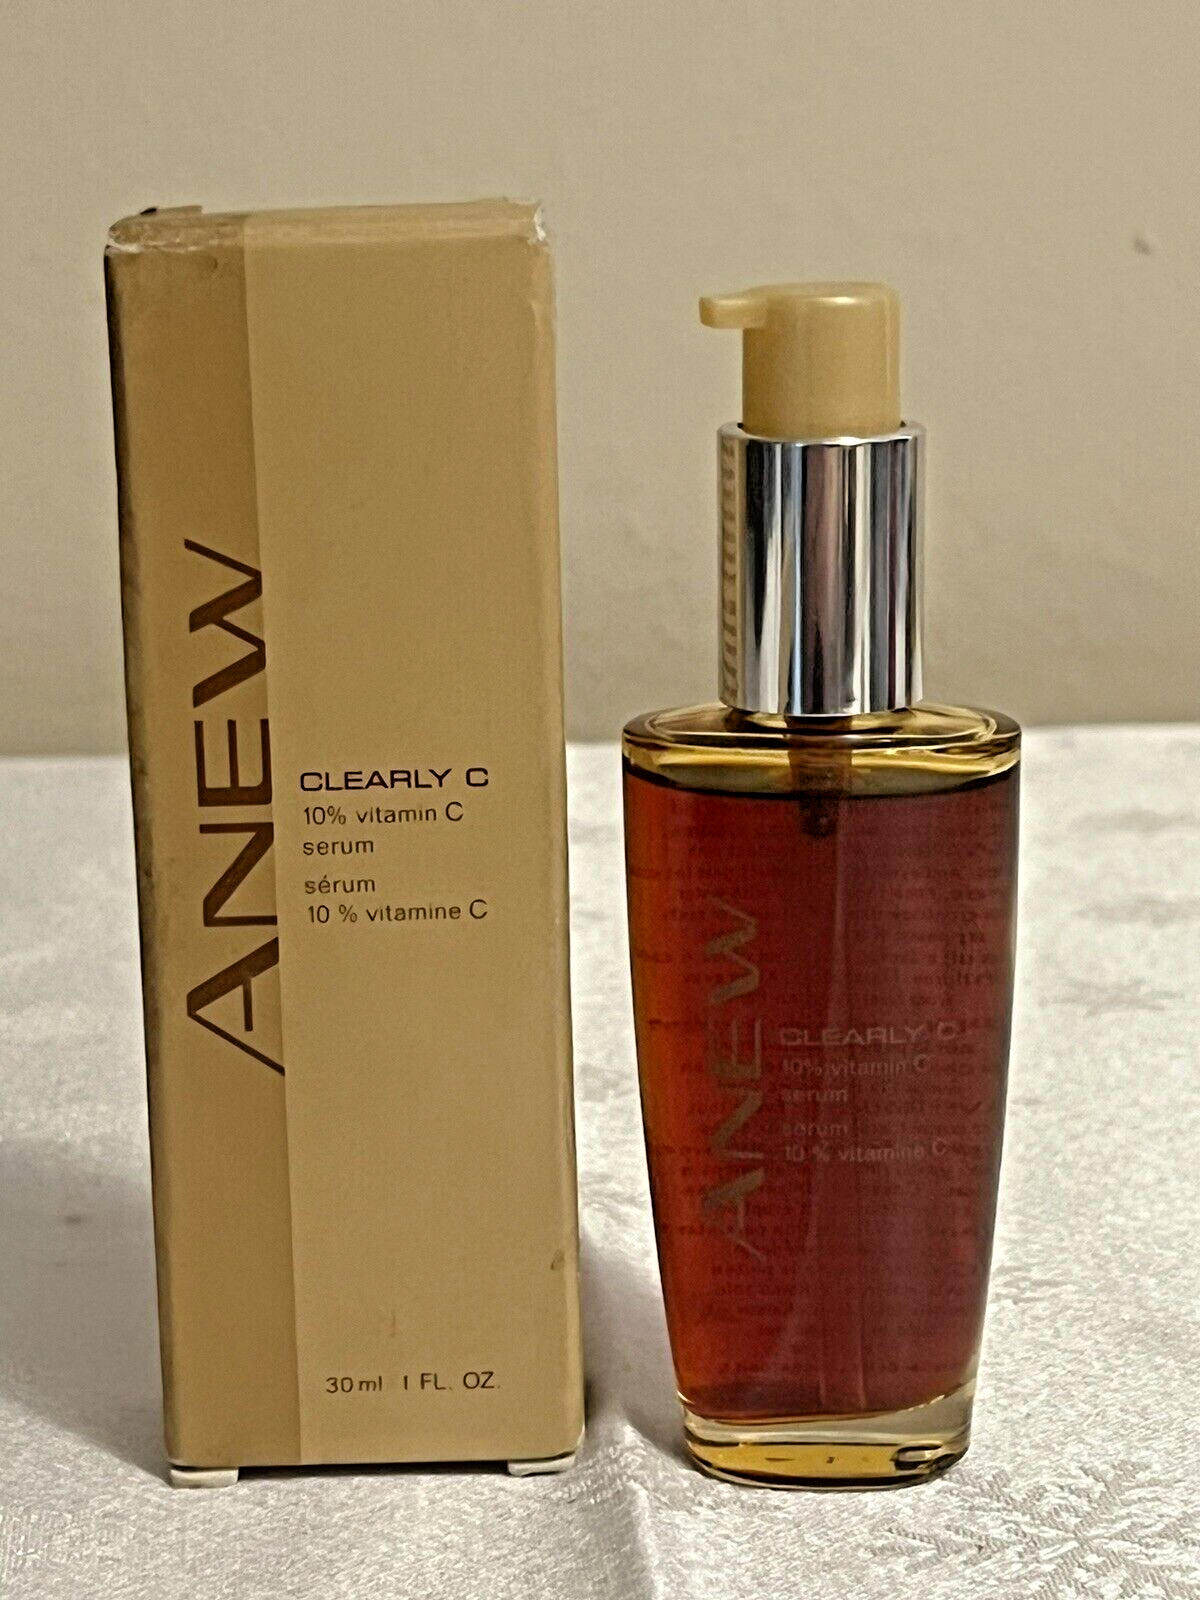 Avon Anew clearly C Serum 10% Vitamin C 1 .oz new old stock for wrinkles/lines - $14.85